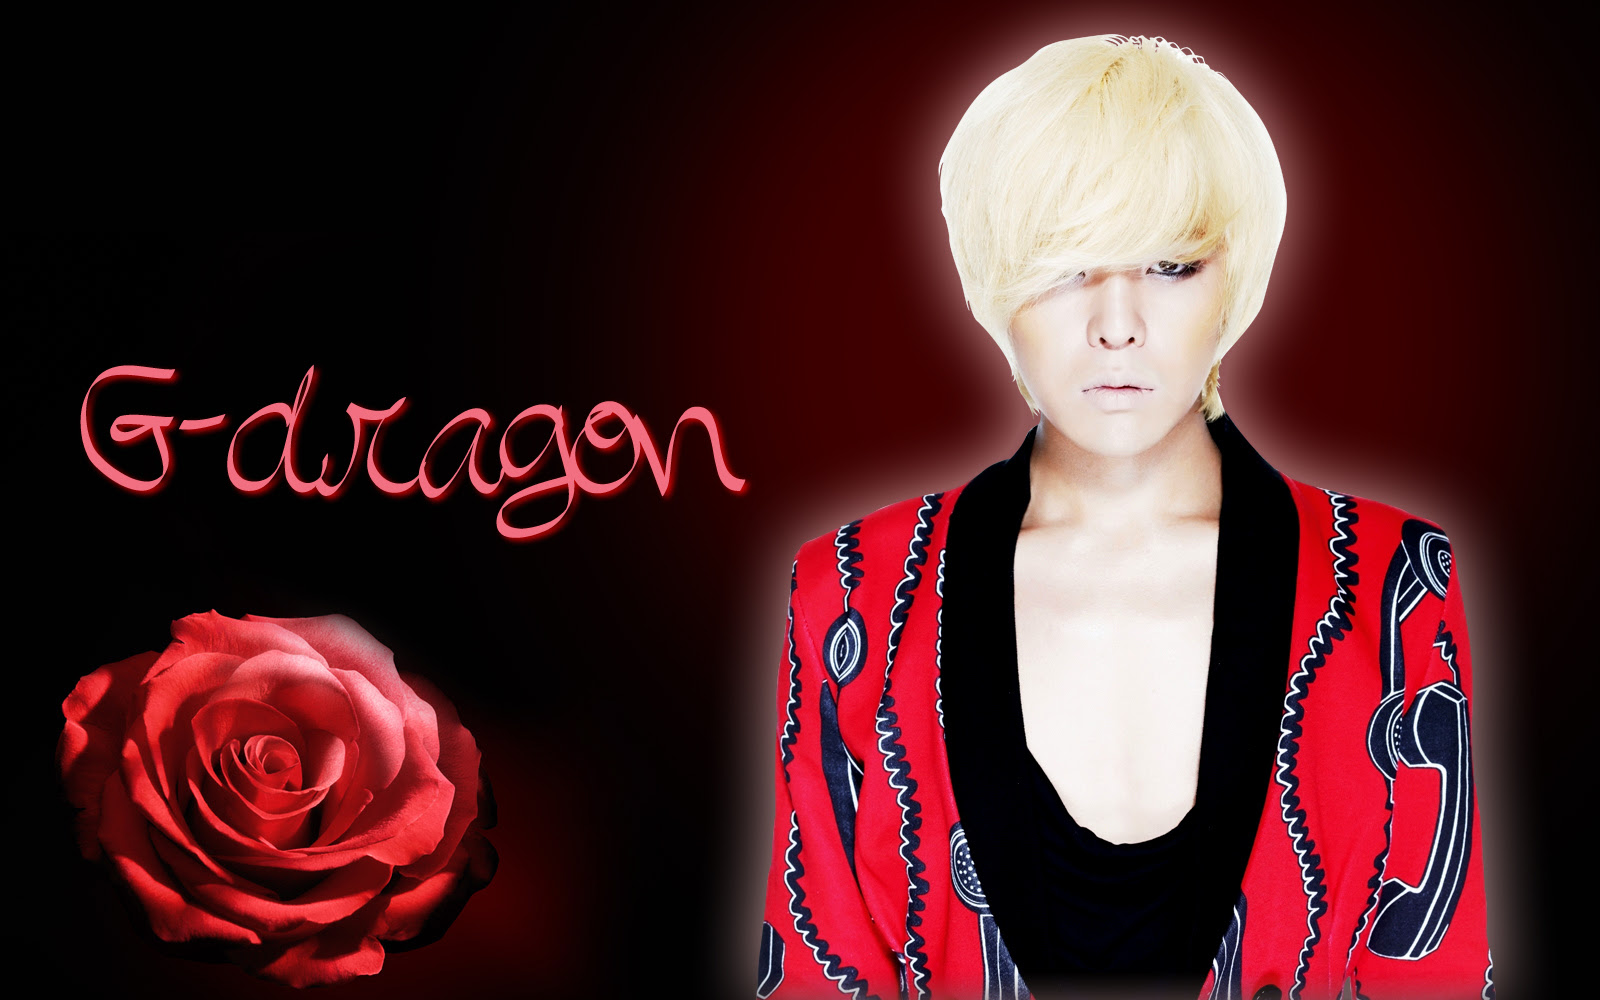 Moving Society Dragon Images Gdragon Hd Wallpaper And Background Photos